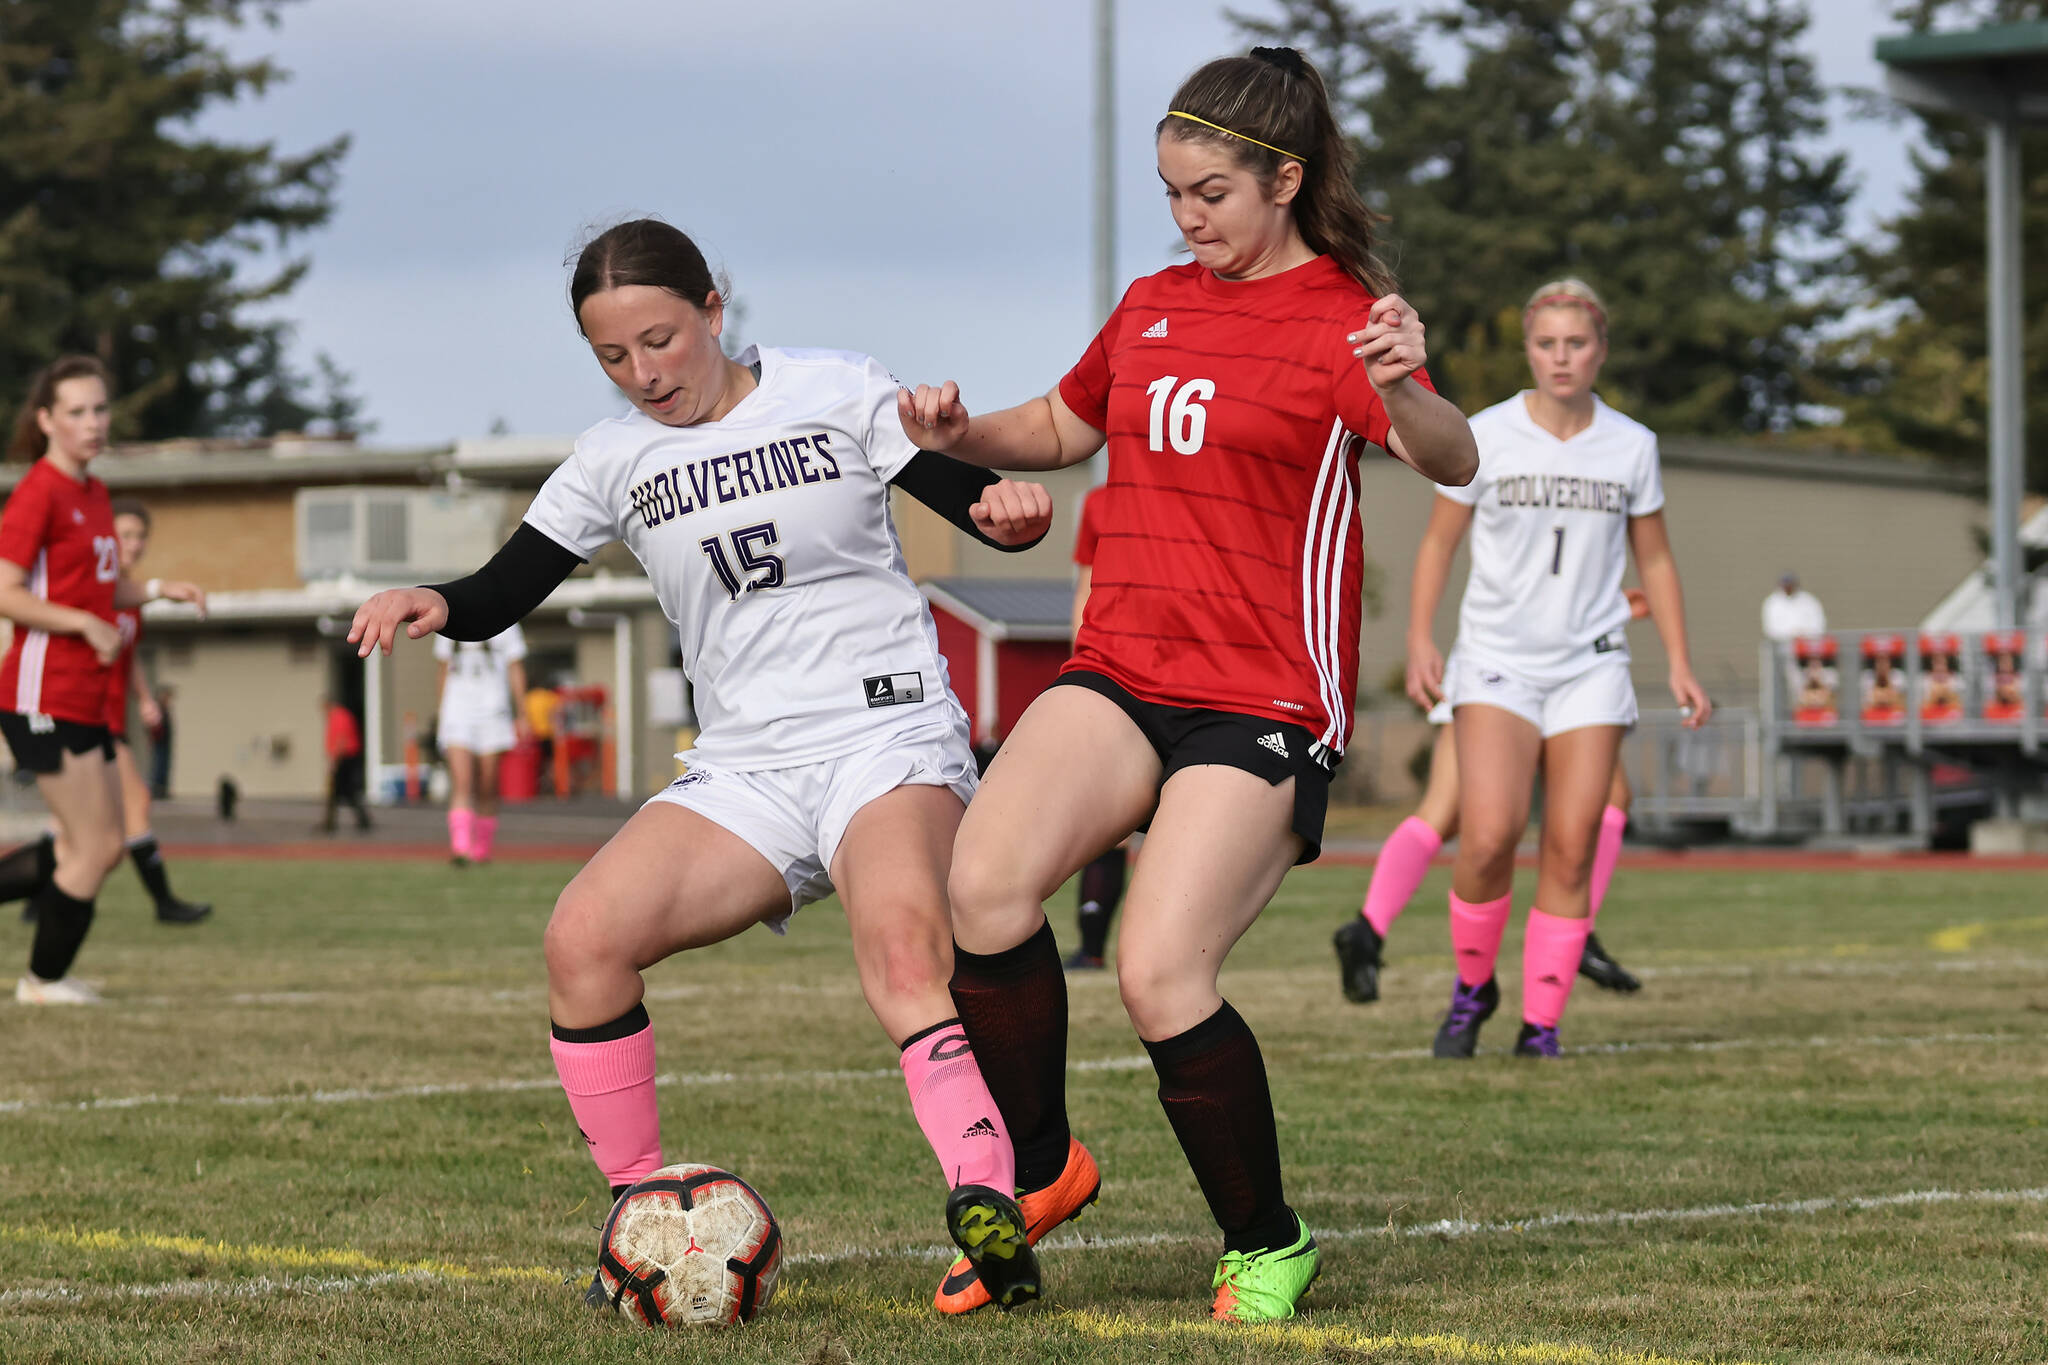 Photo by John Fisken
Skylar Parker, right, vies for possession of the ball with a Friday Harbor player.